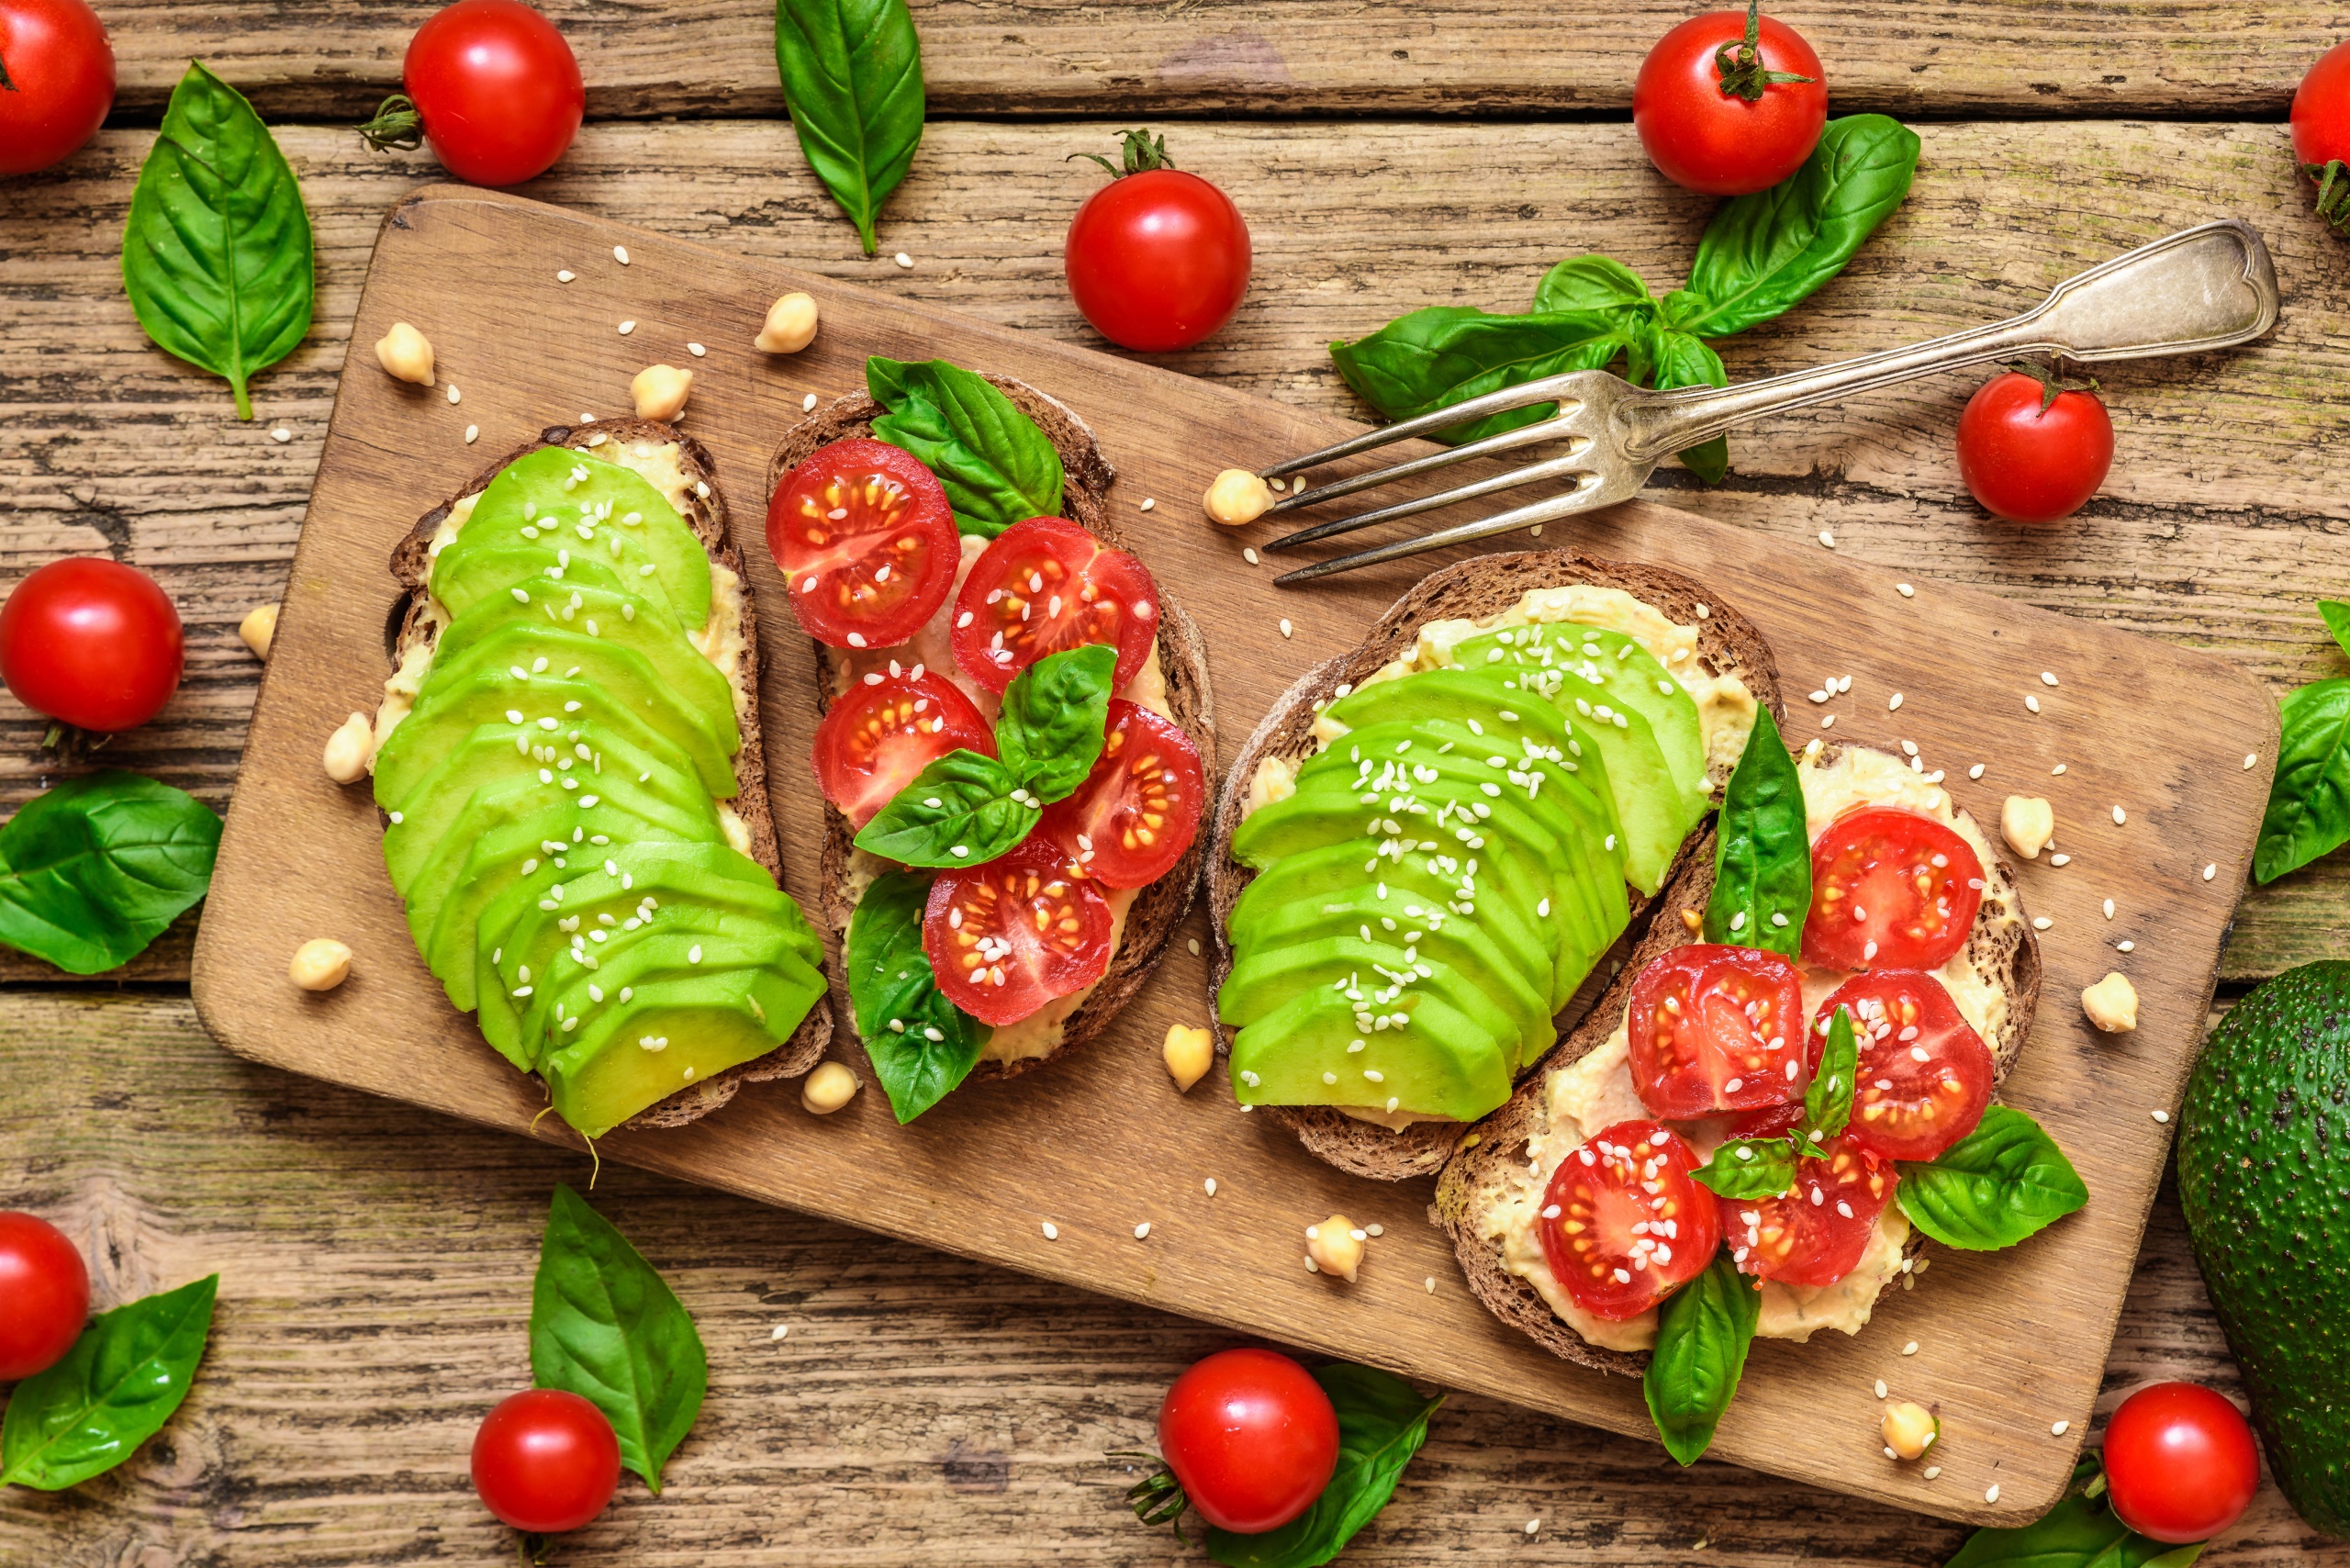 General 2560x1708 food bread fork tomatoes wooden surface cutting board toasts avocados basil closeup